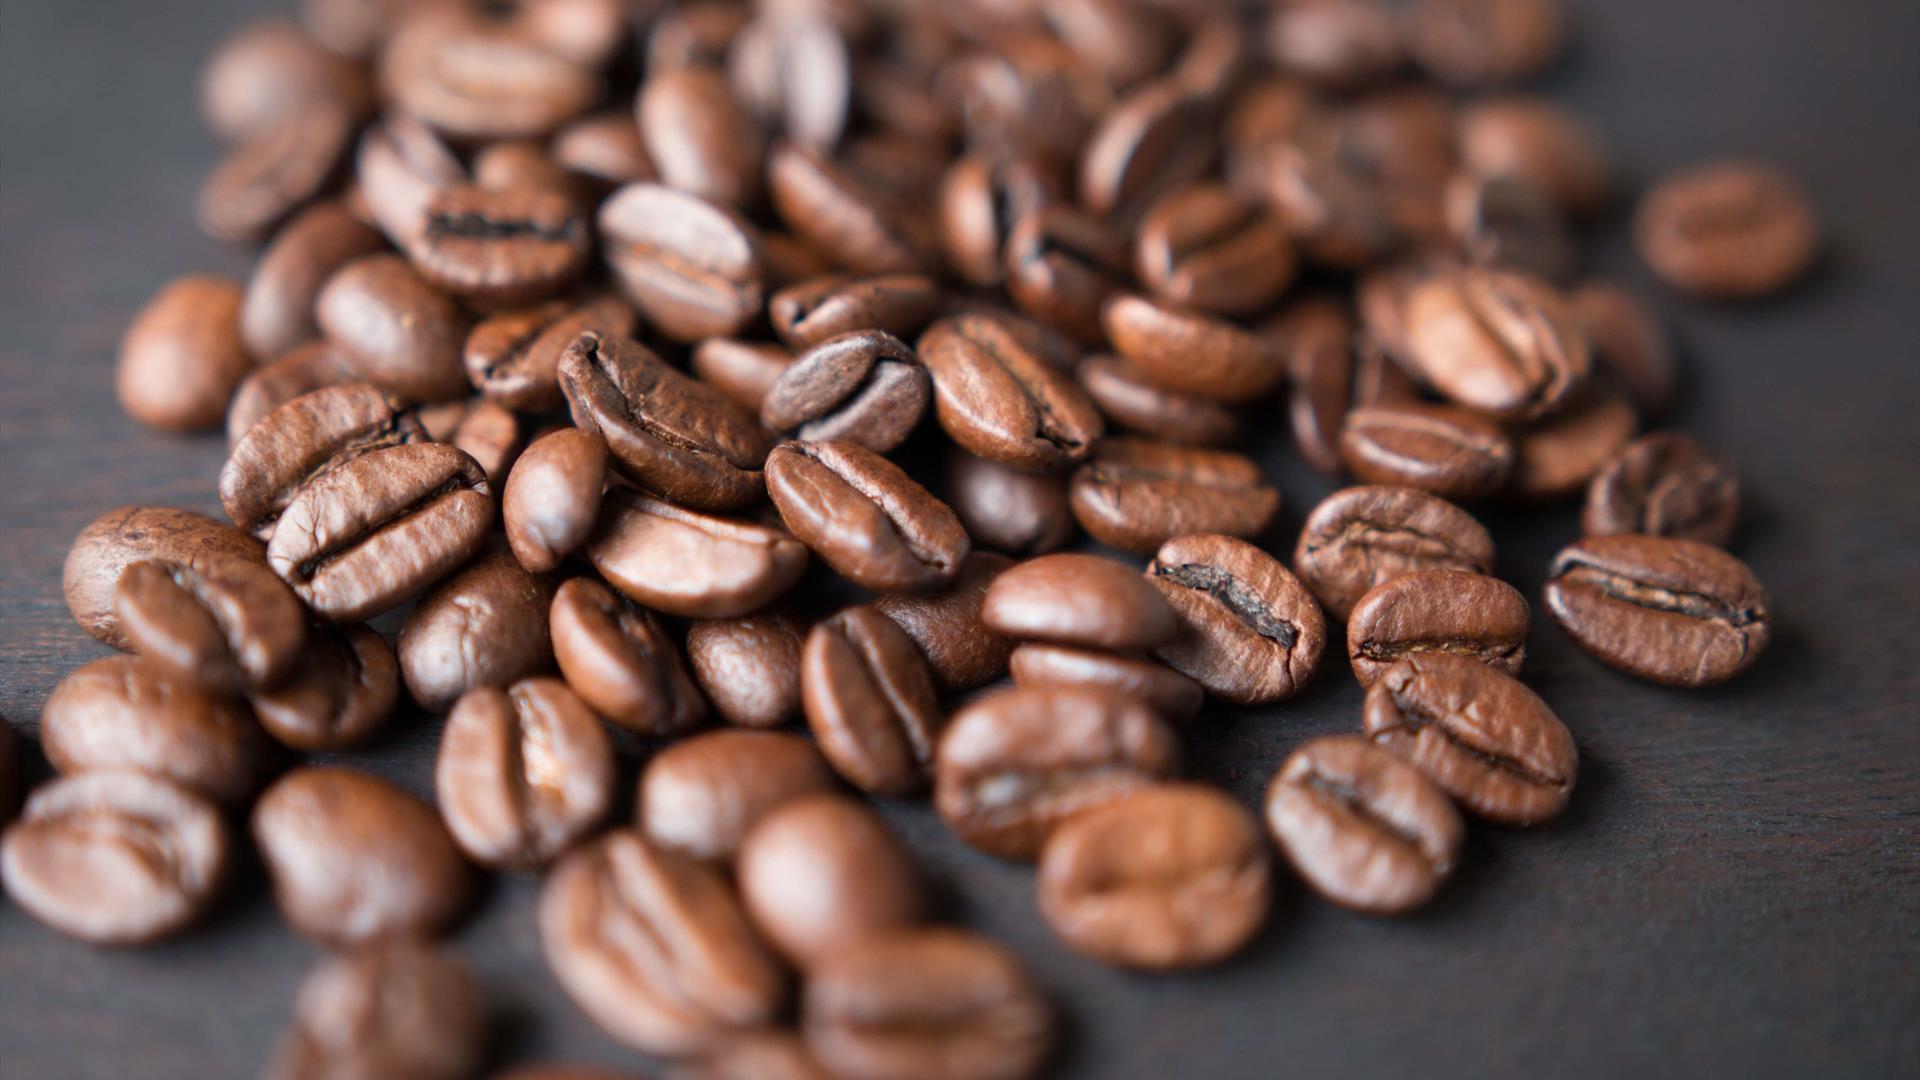 Image shows coffee beans on the table